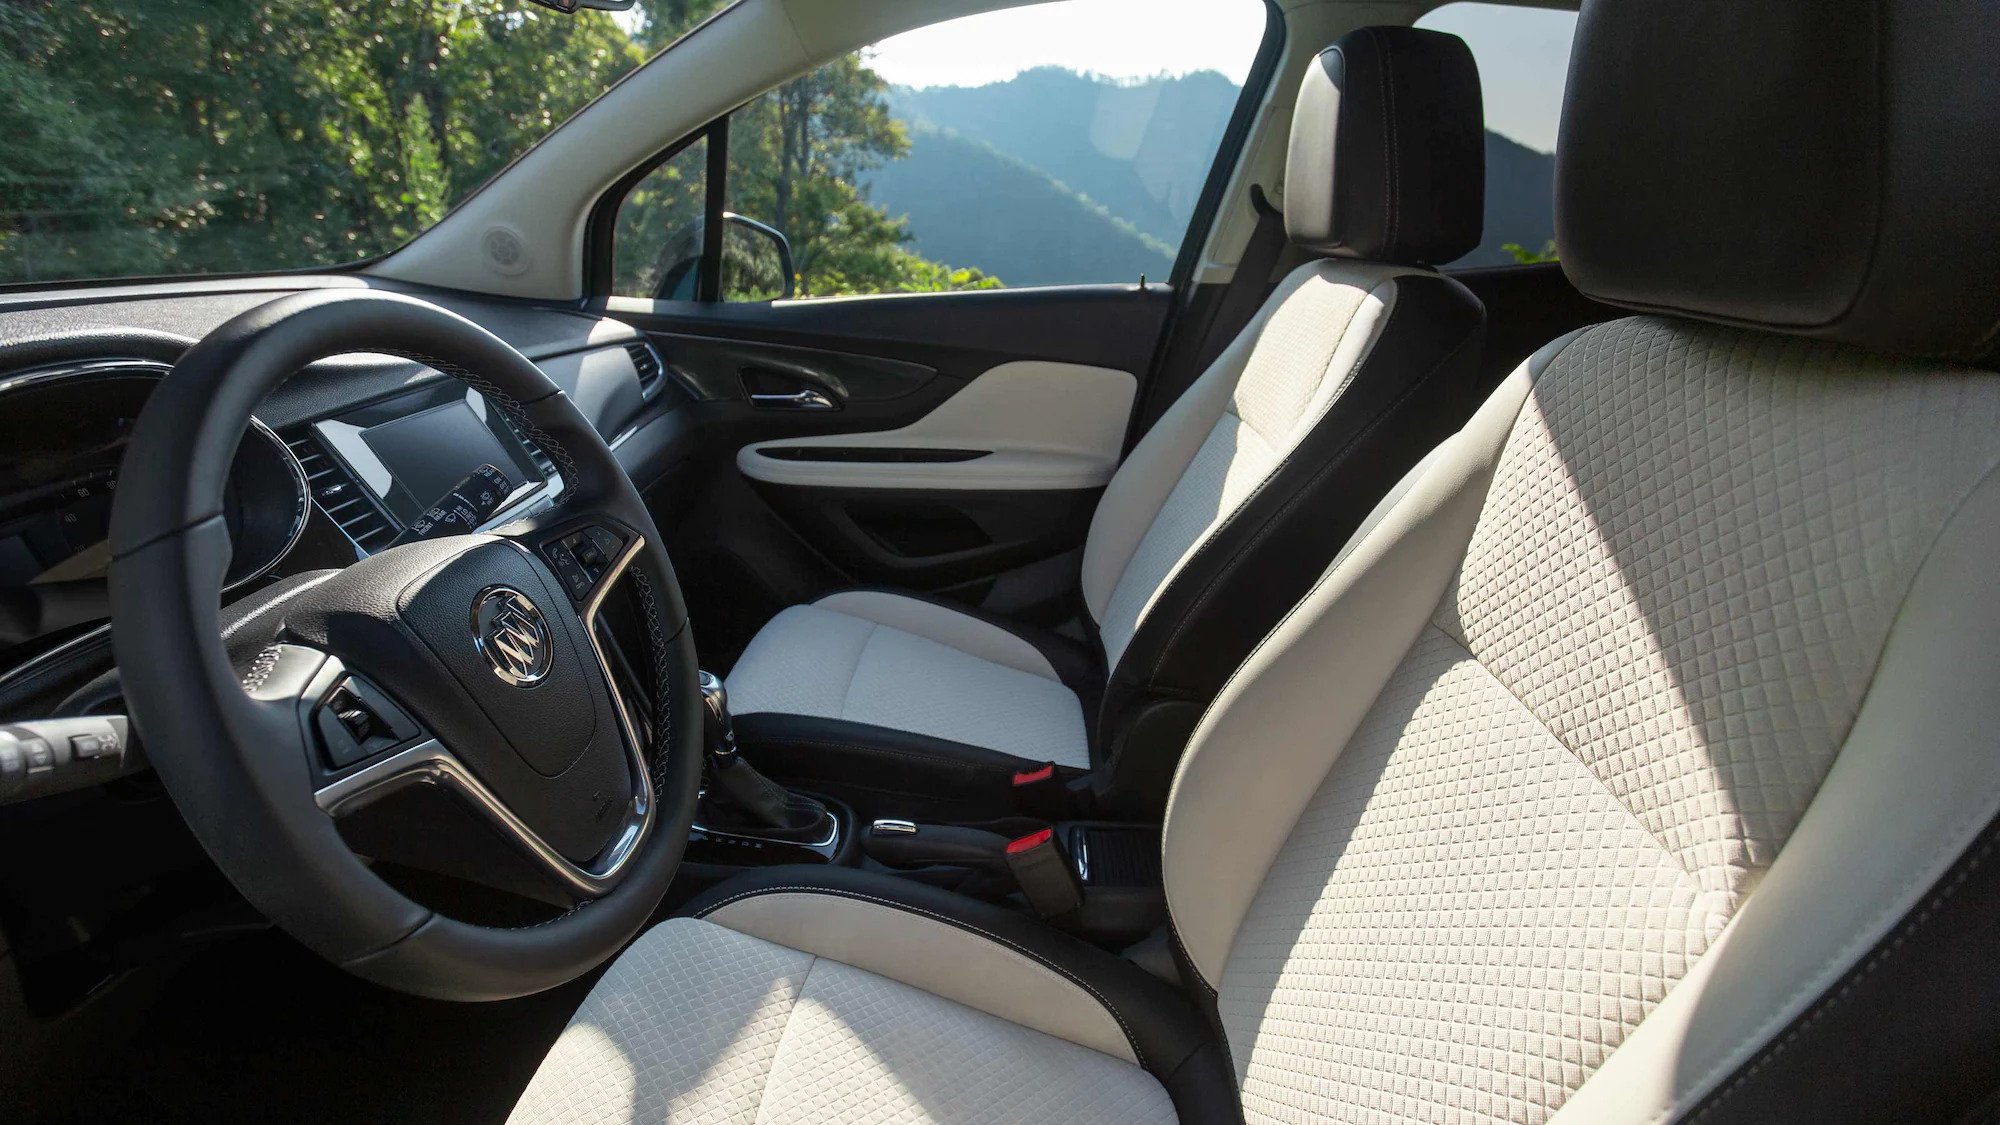 With the flawless design, the Buick Small SUV range offers you all the conveniences you expect and much more. Shop the 2022 Buick Encore range at your local dealership, Courtesy Buick GMC in Louisville, KY.